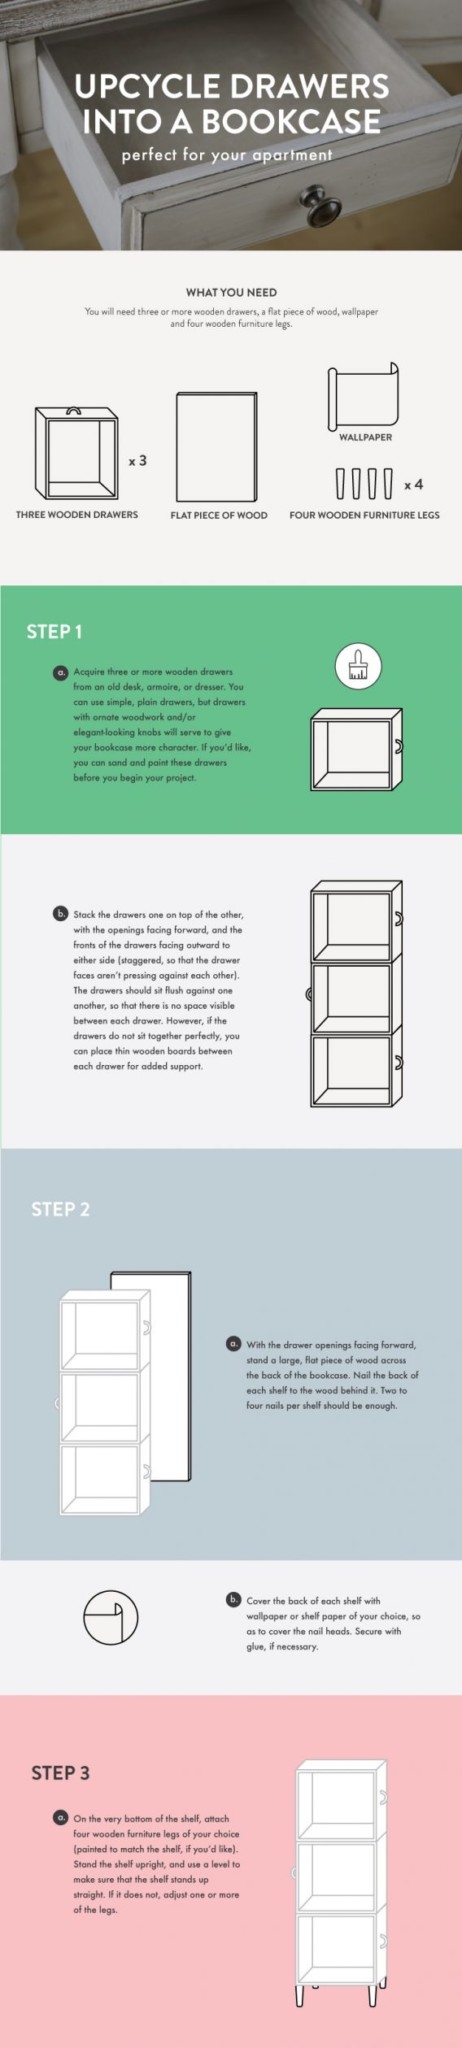 Upcycle Drawers infographic | 3 Simple and Inexpensive DIY Furniture Projects